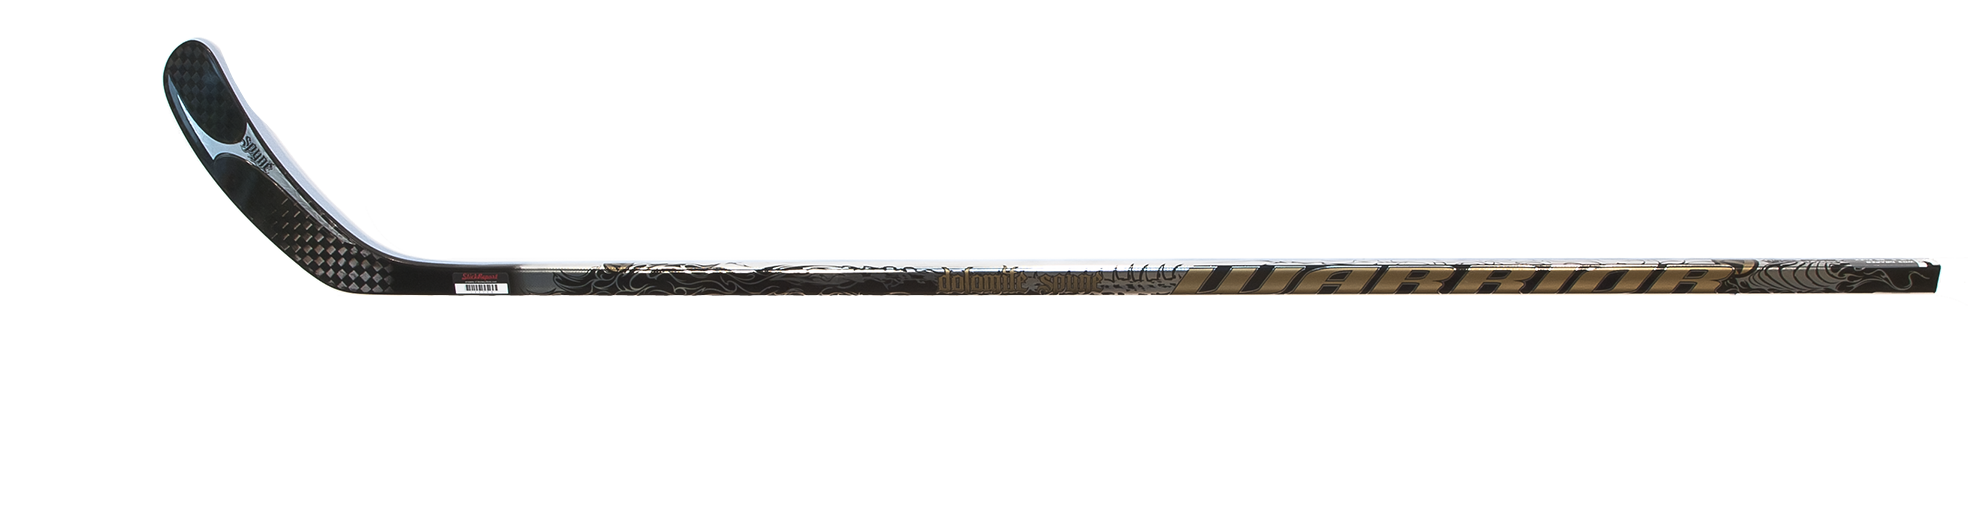 Hockey Stick Png File PNG Image